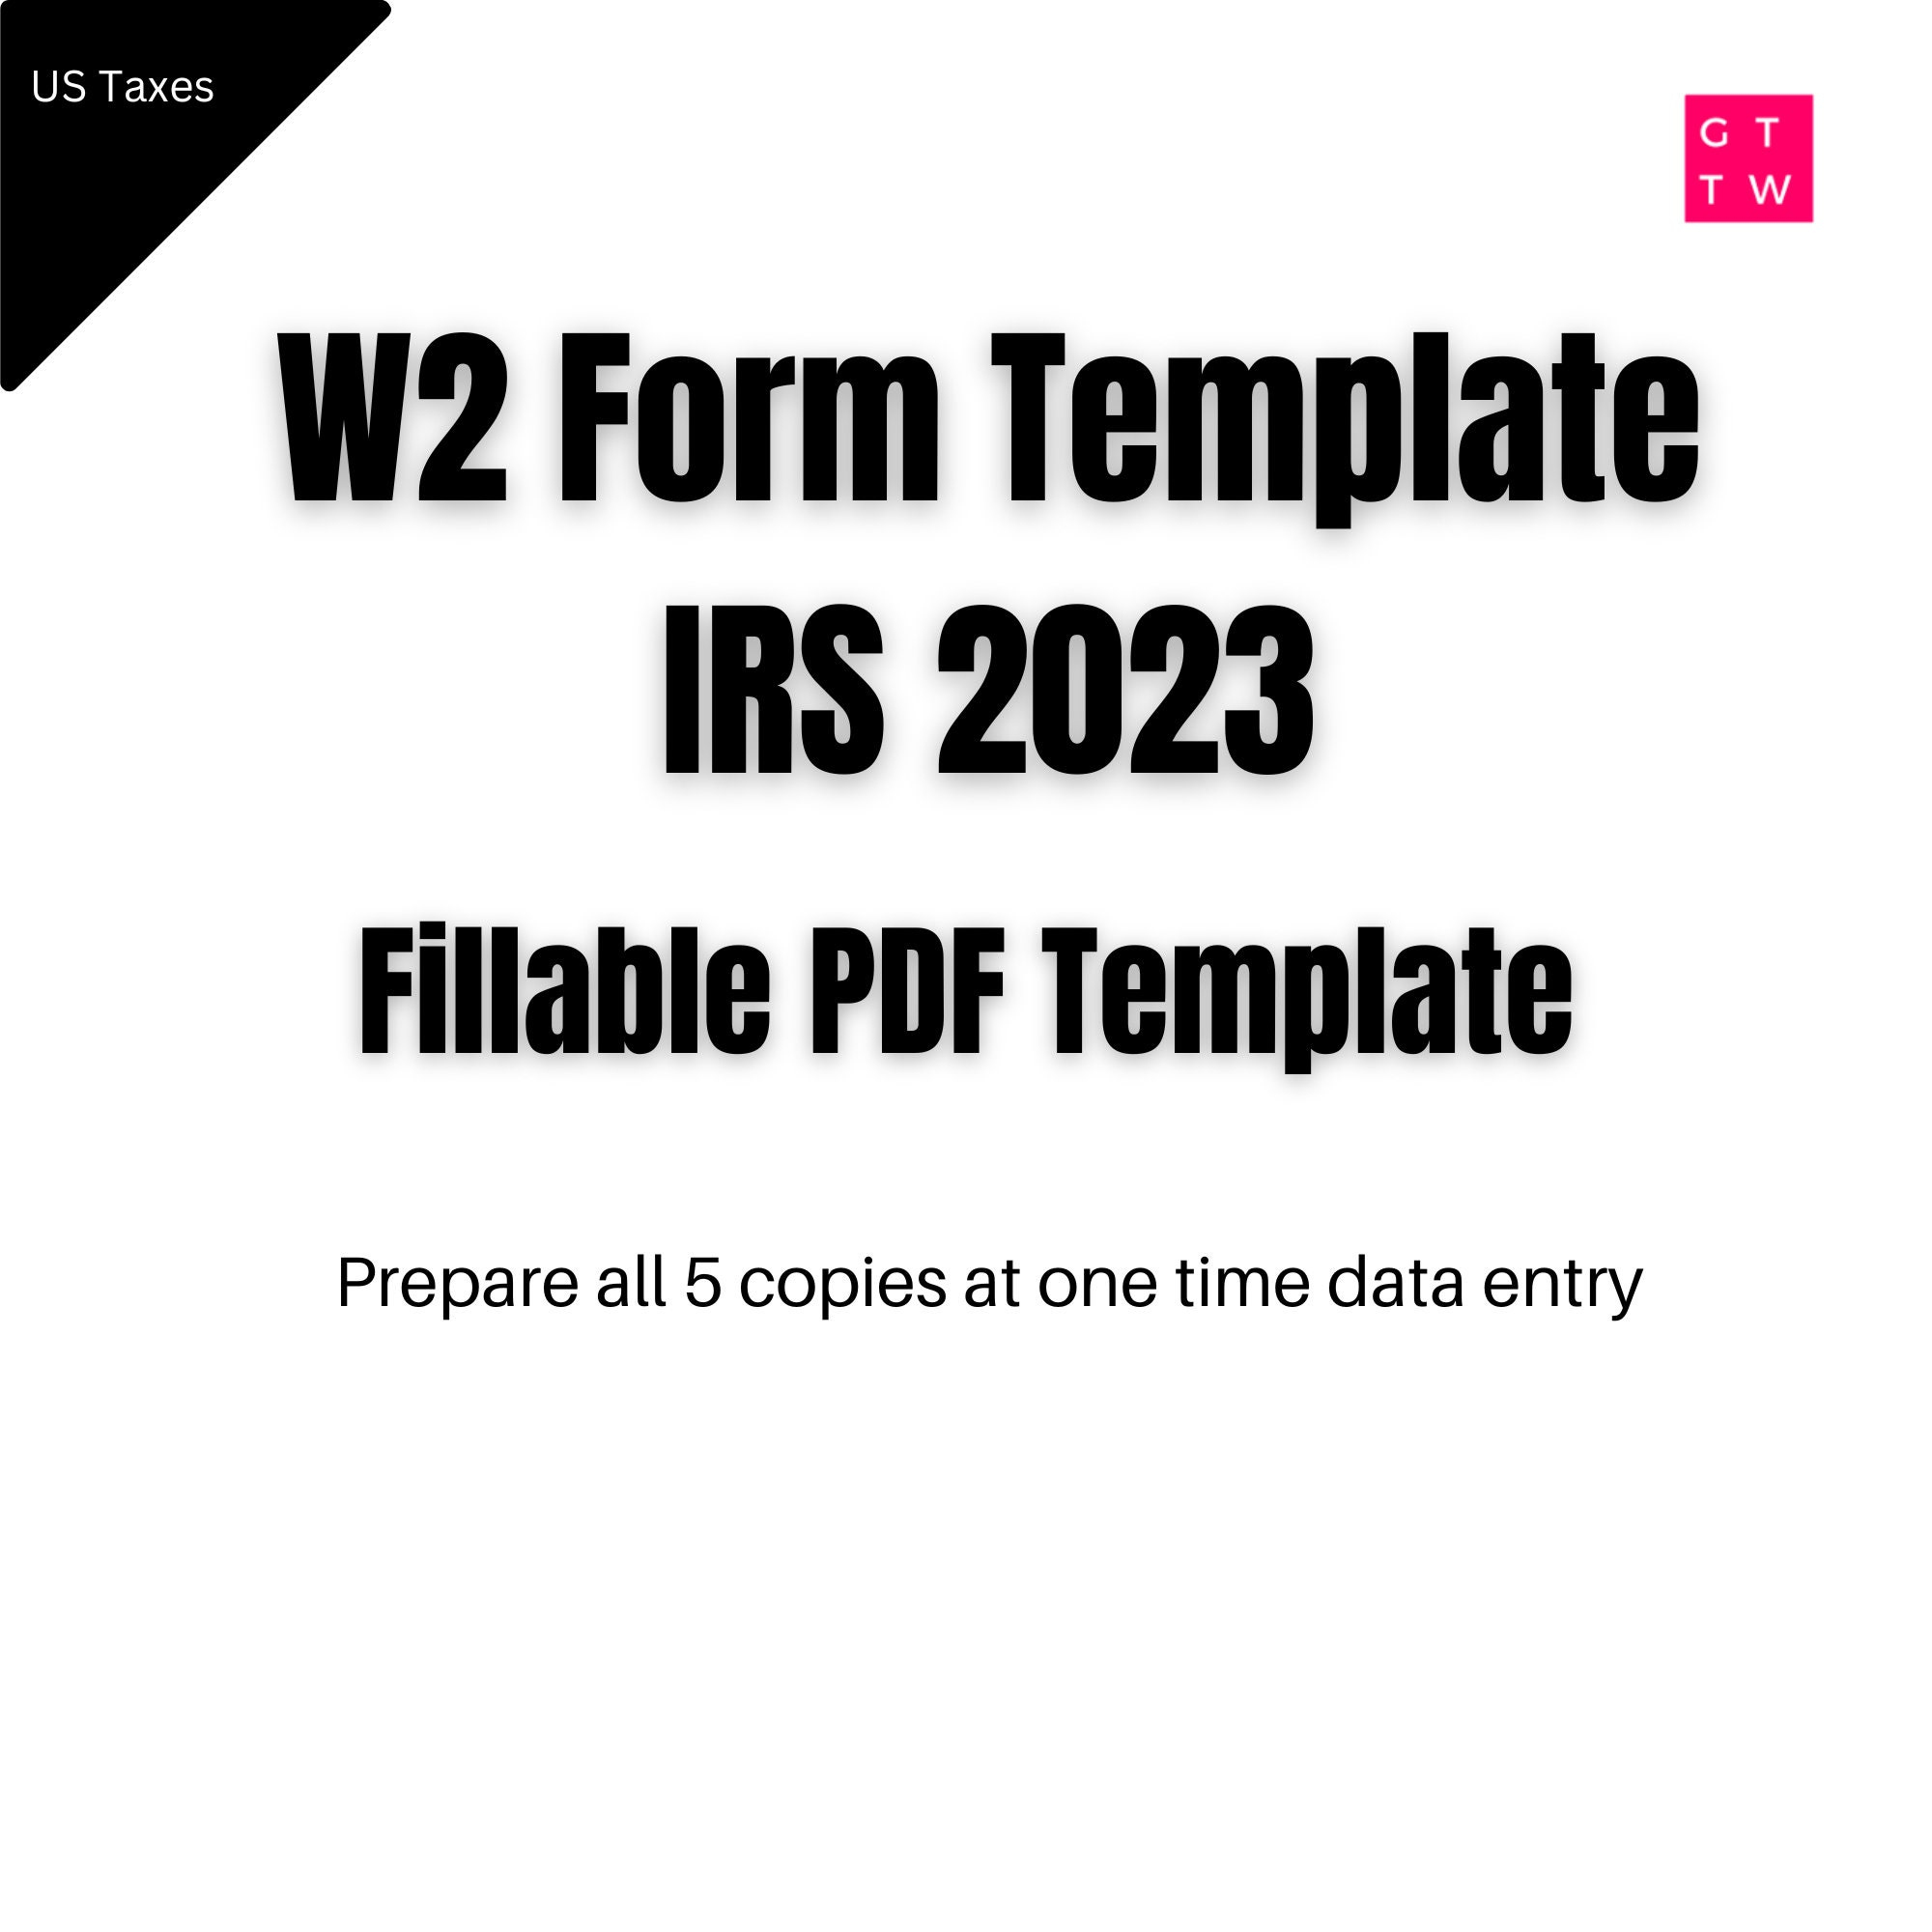 W2 Form Irs 2024/2023 Fillable Pdf With Print And Clear Buttons for Bath And Body Works W2 Former Employee